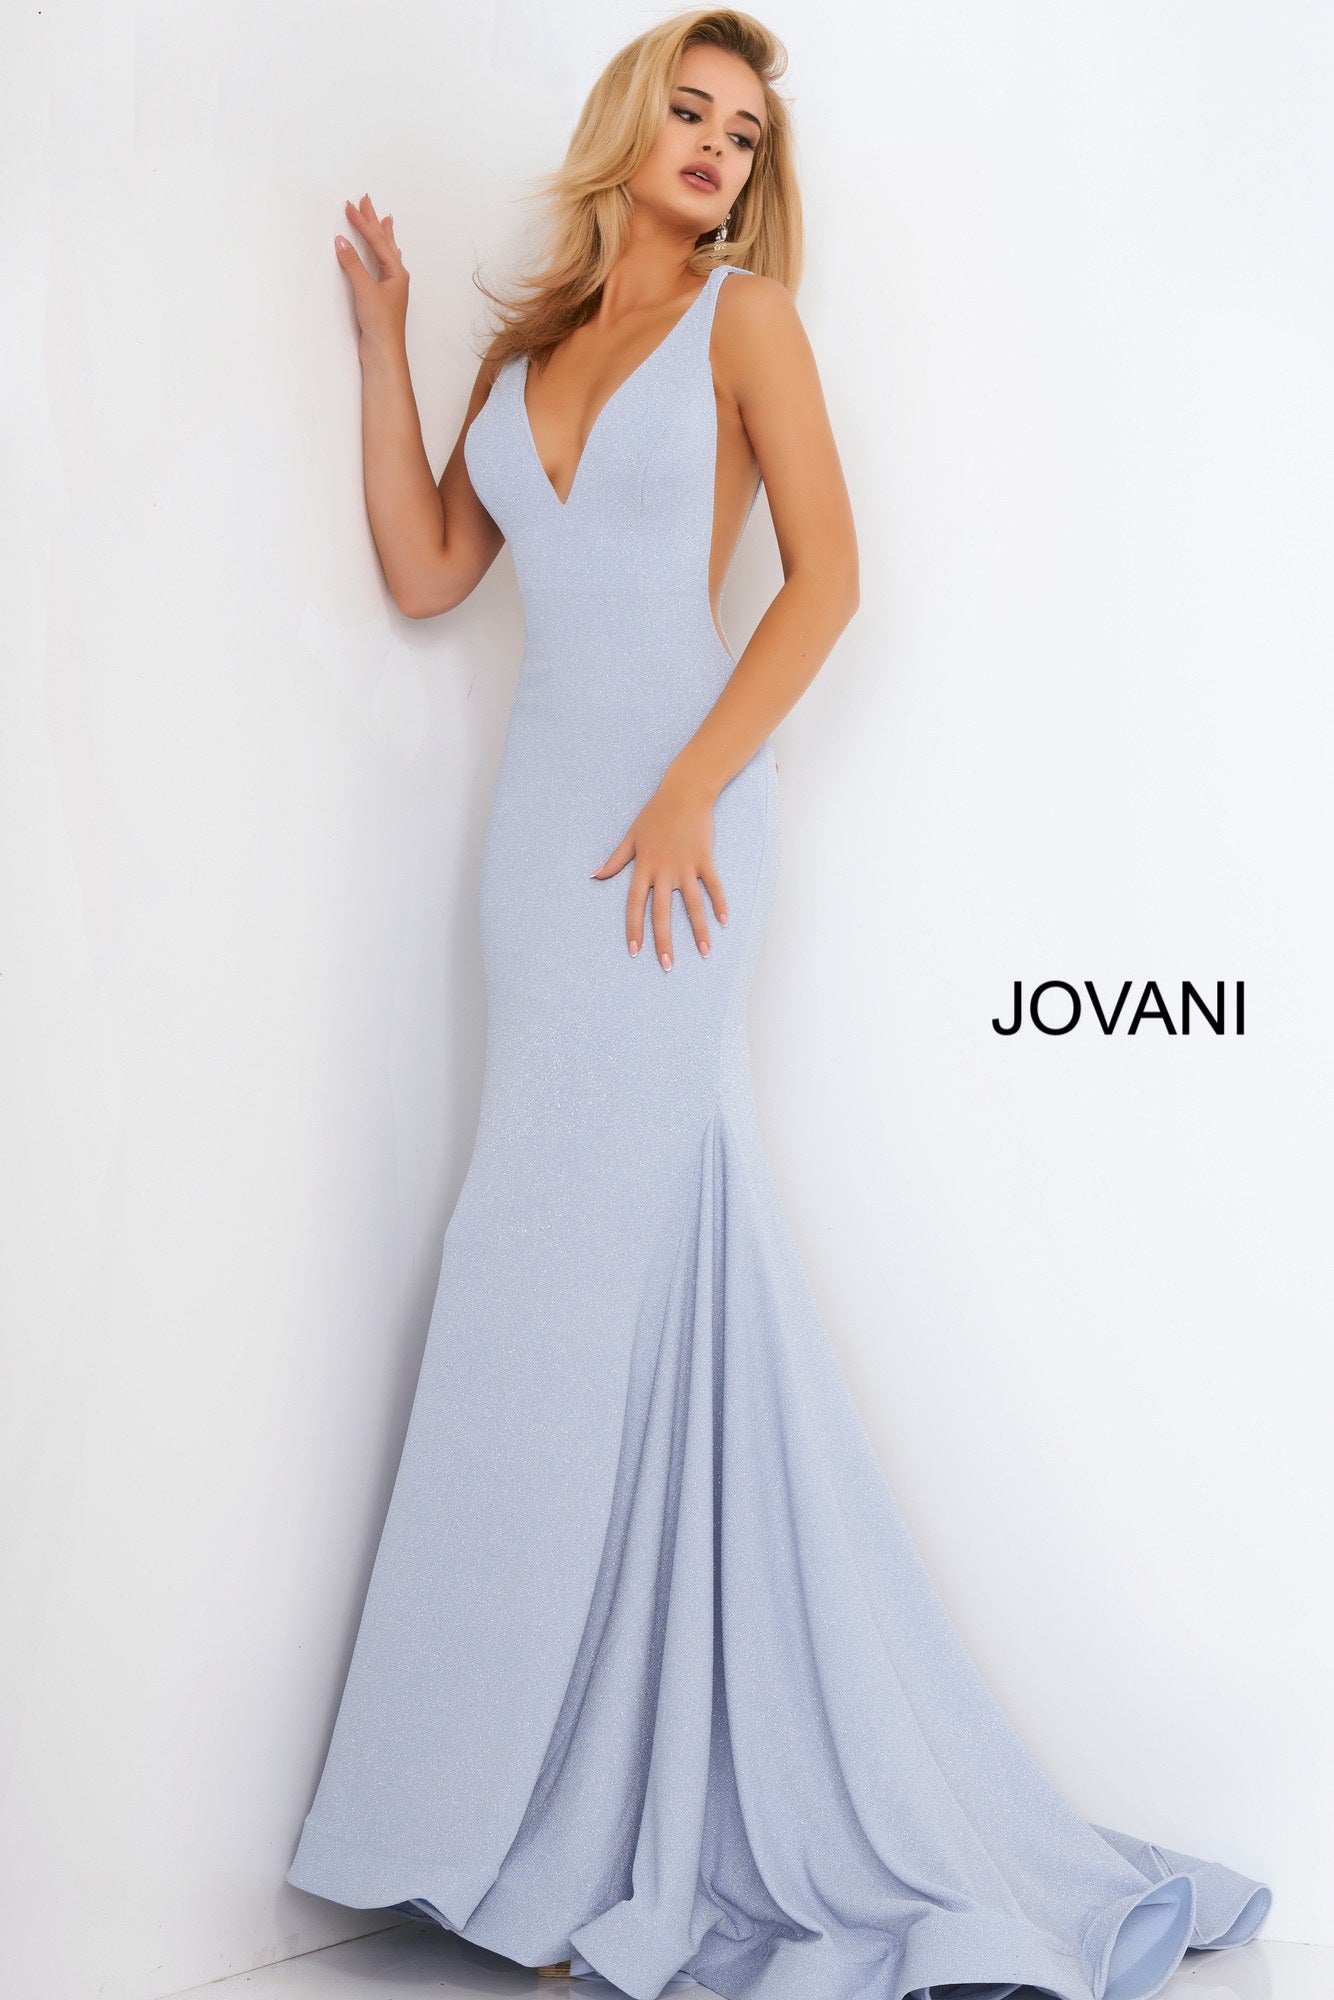 Jovani 02132 Blue V Neck Jovani Prom Dress 02132 Long Sexy Fitted Mermaid Prom Dress, Deep V Plunging Neckline with a Fit & Flare Shape Leading to a lush trumpet skirt with horse hair trim. Stretch Glitter fabric adds a touch of glam and a comfortable wear all night long!  Available Sizes: 00-24  Available Colors: blue, champagne, orange, pink